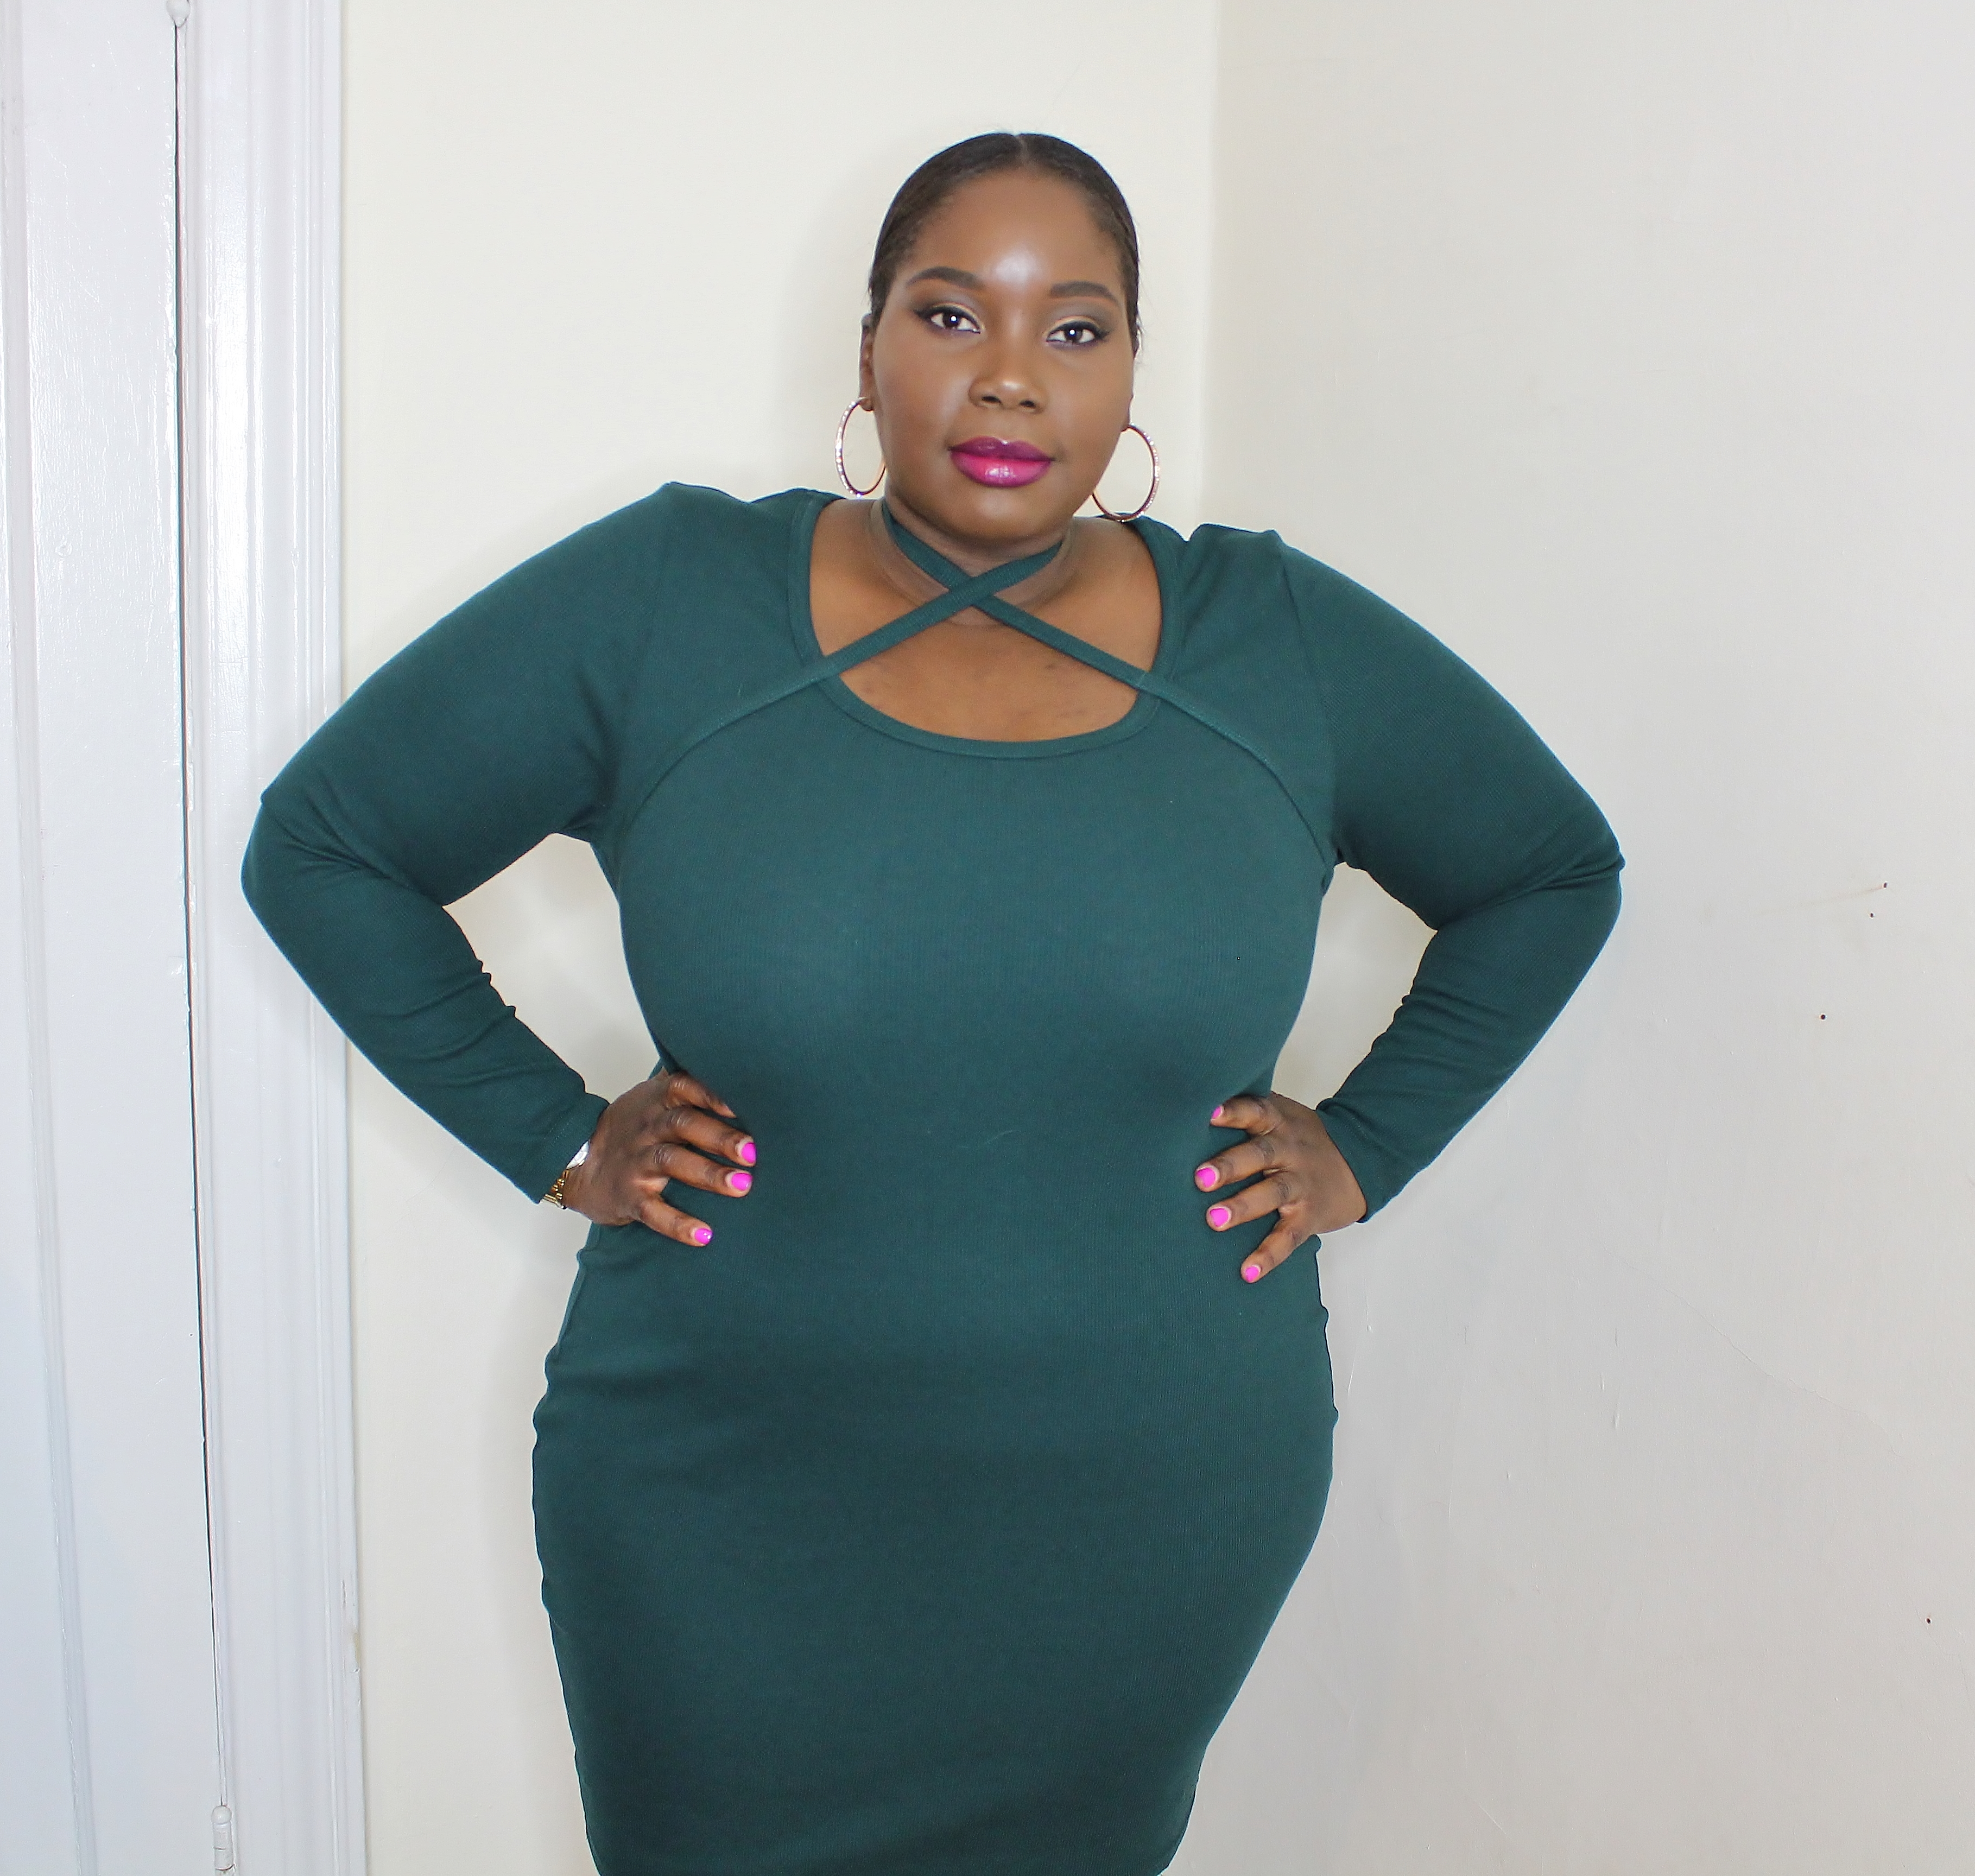 Learn How To Shop Amazon Plus Size Clothing With These Tips & Tricks